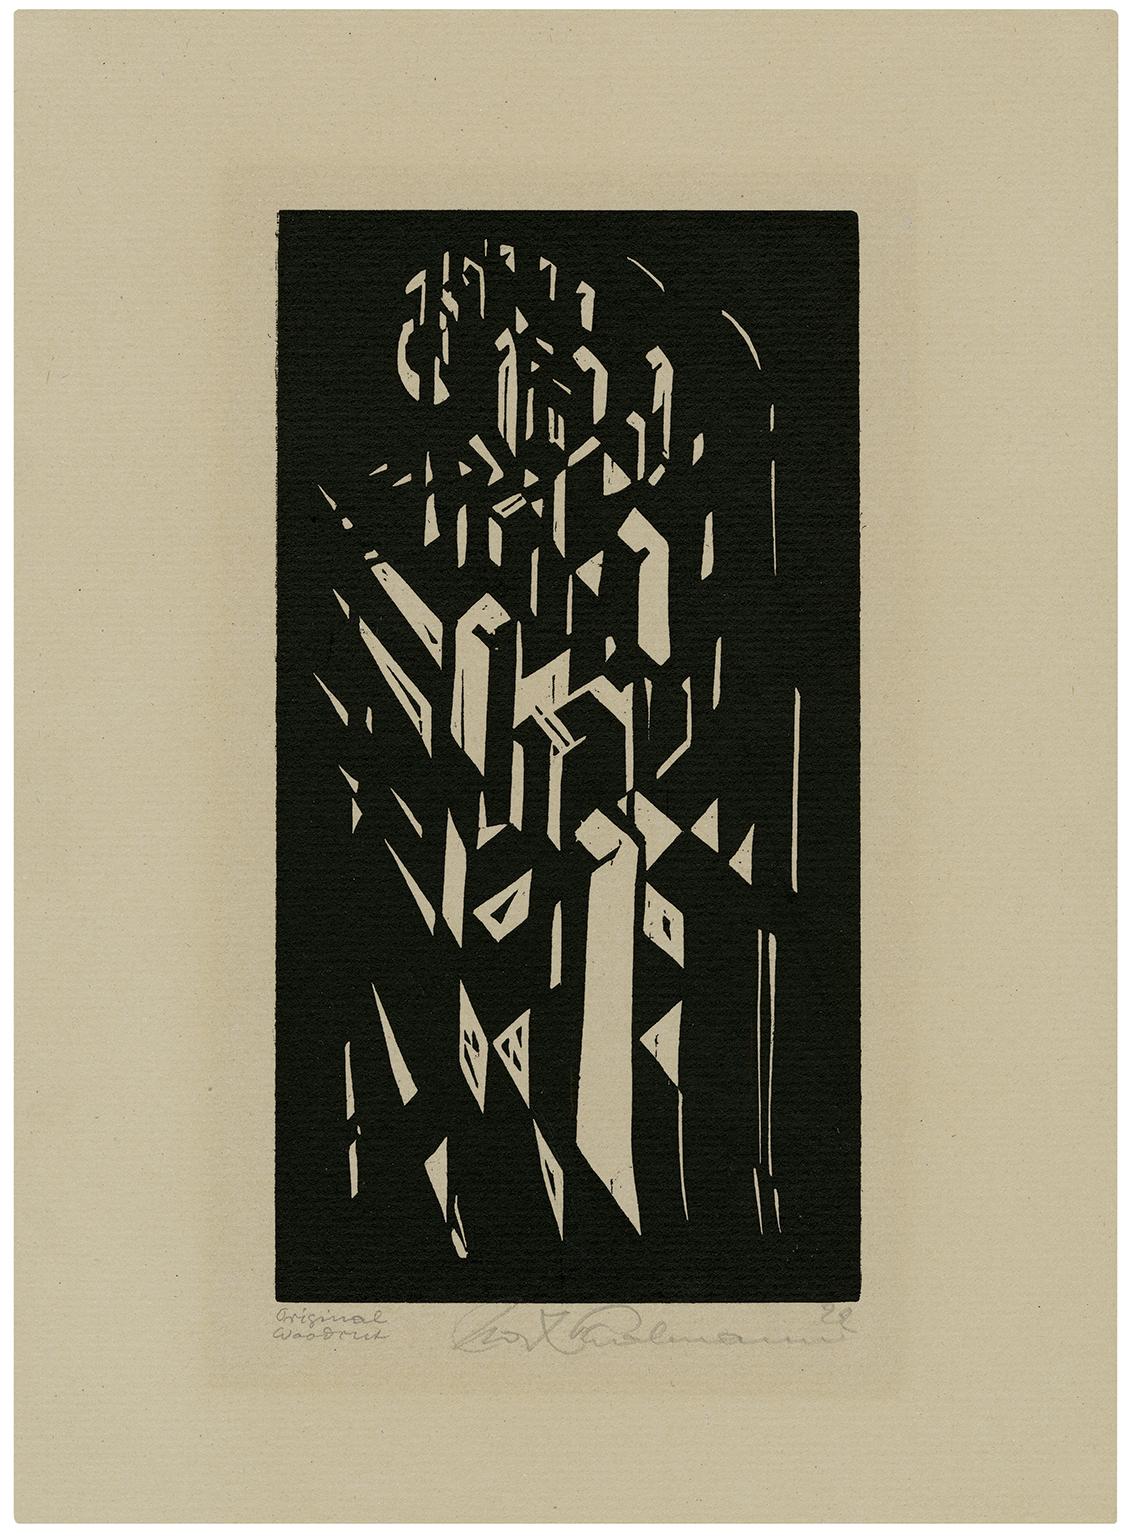 Domstudie 19 (Cathedral Study) - Print by Max Thalmann